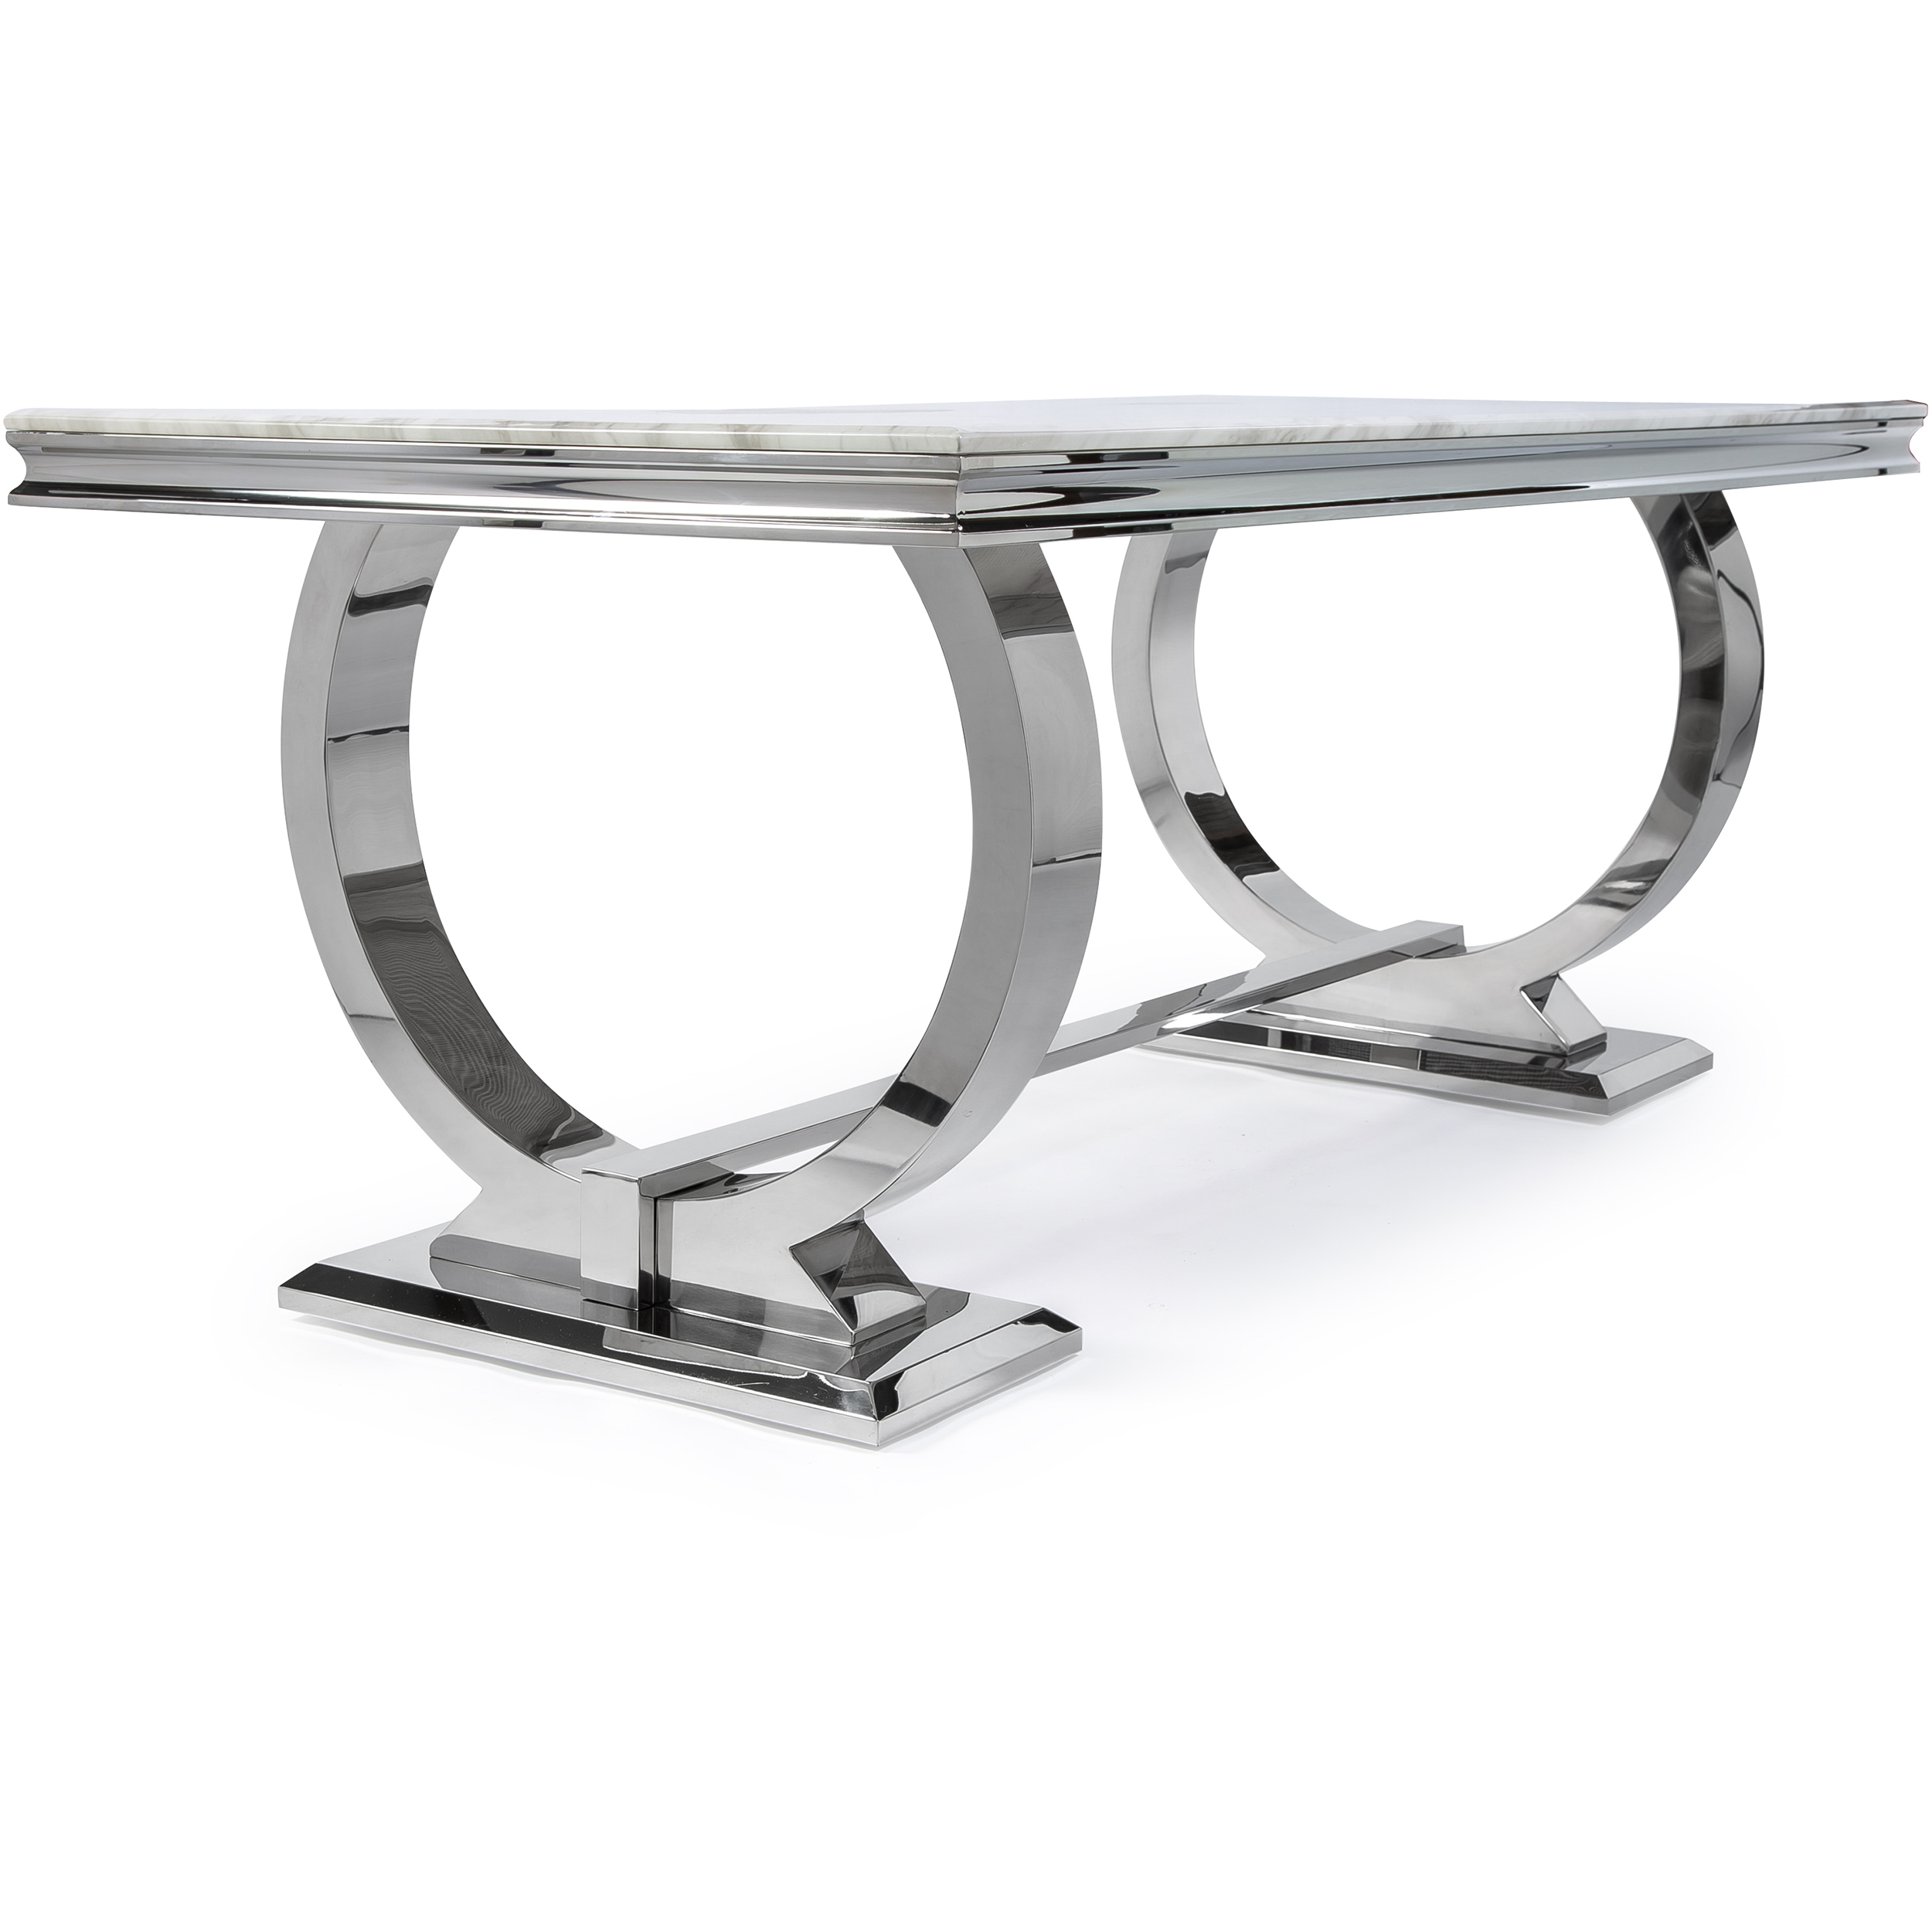 Siena 1.8M Polished Steel & Marble White Top Dining Table